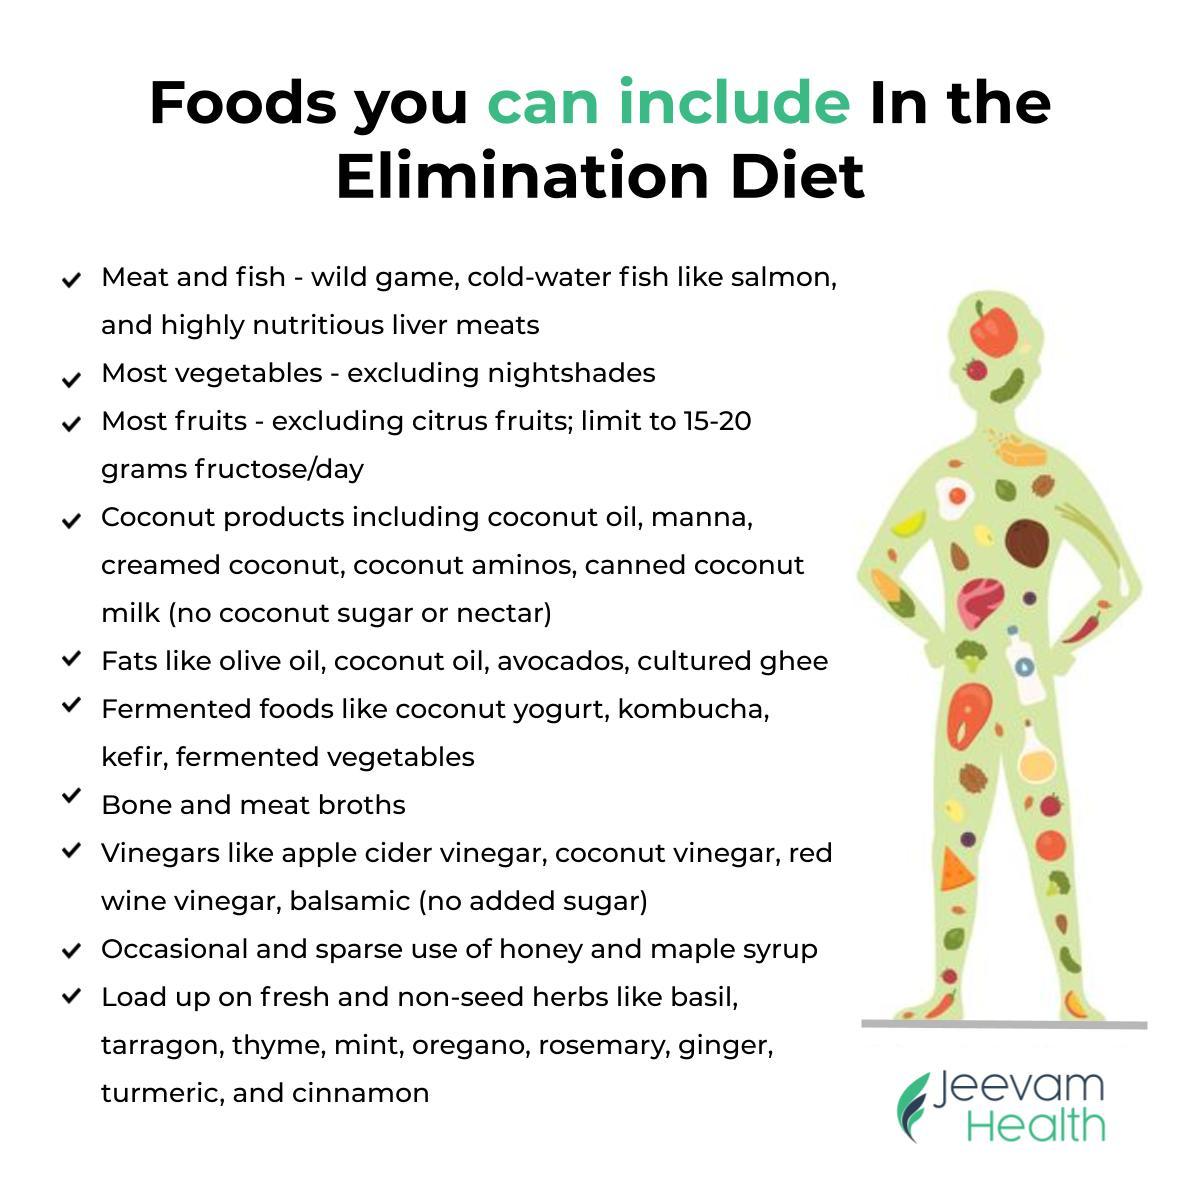 Foods to include in the Elimination Diet/